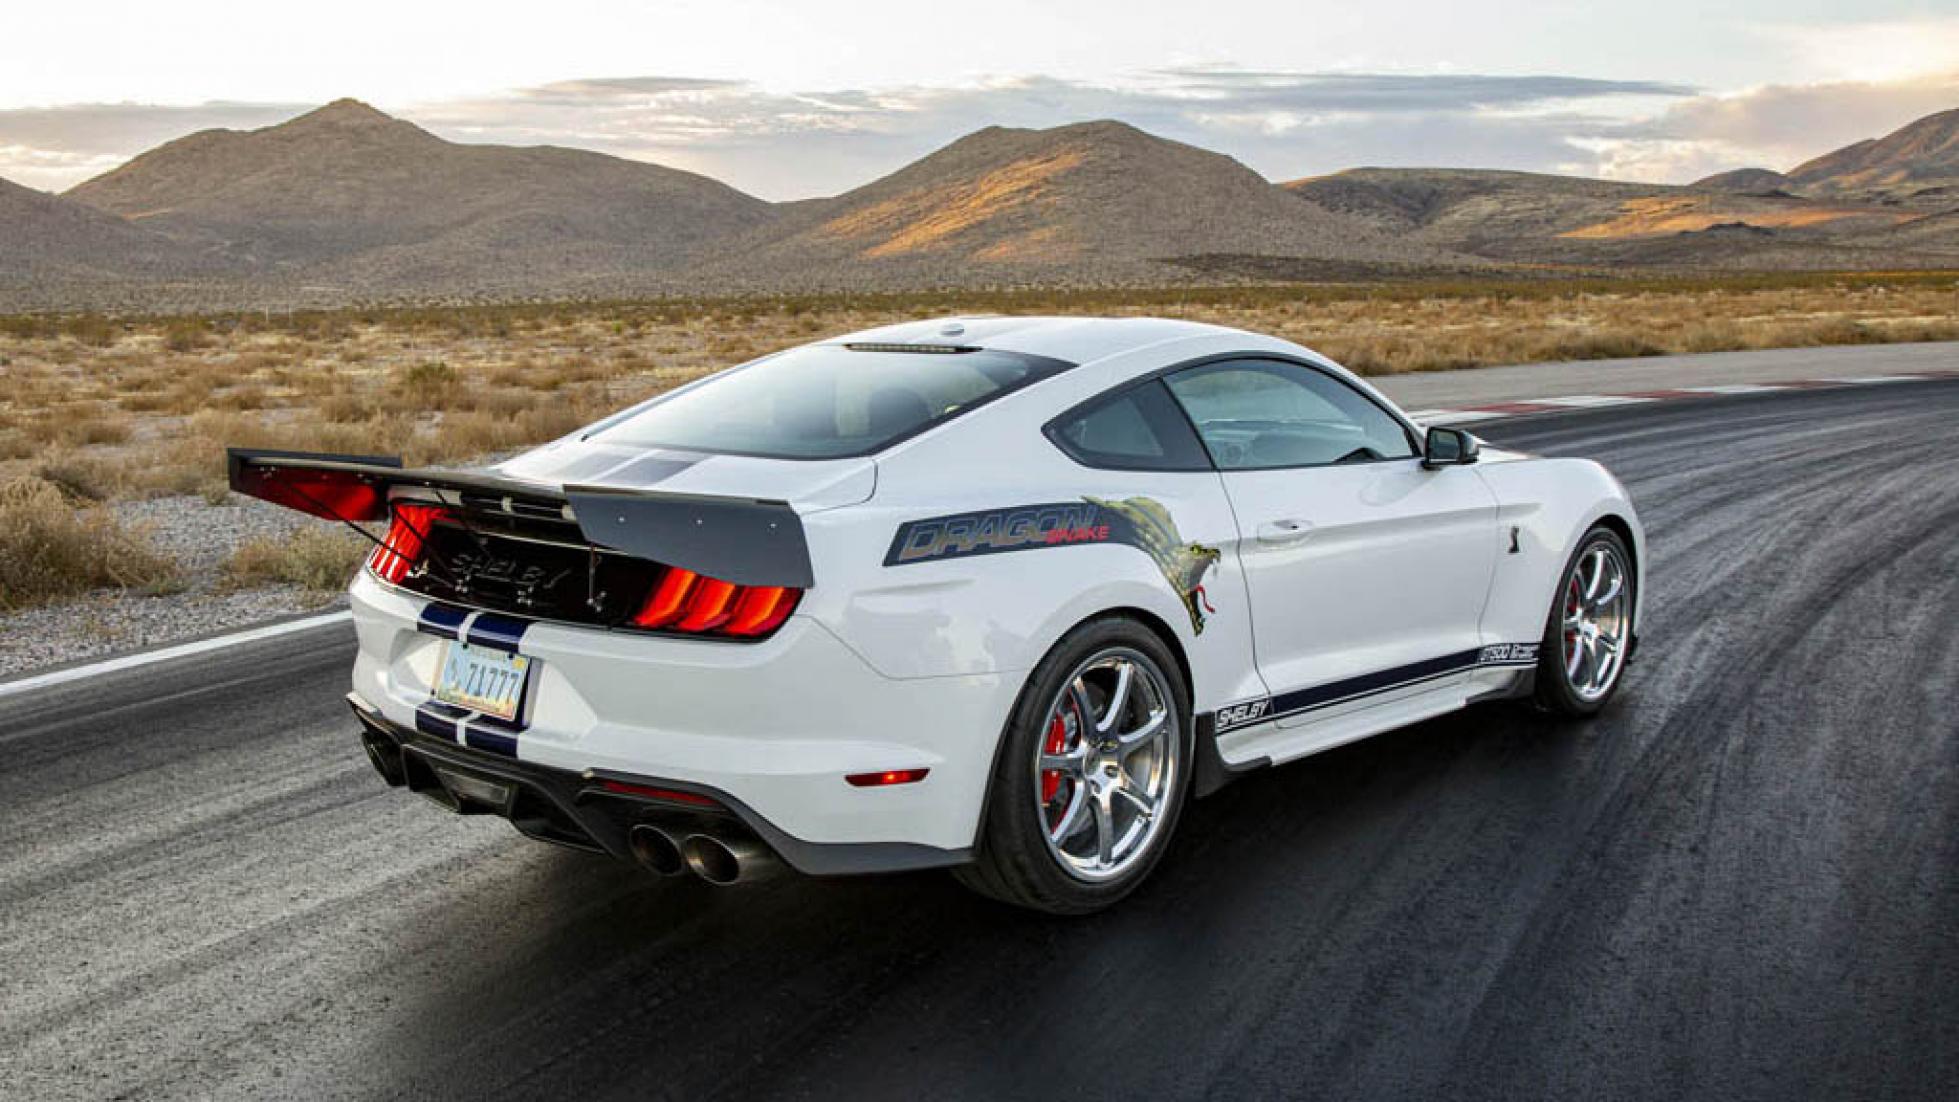 Shelby has already tuned the Mustang GT500